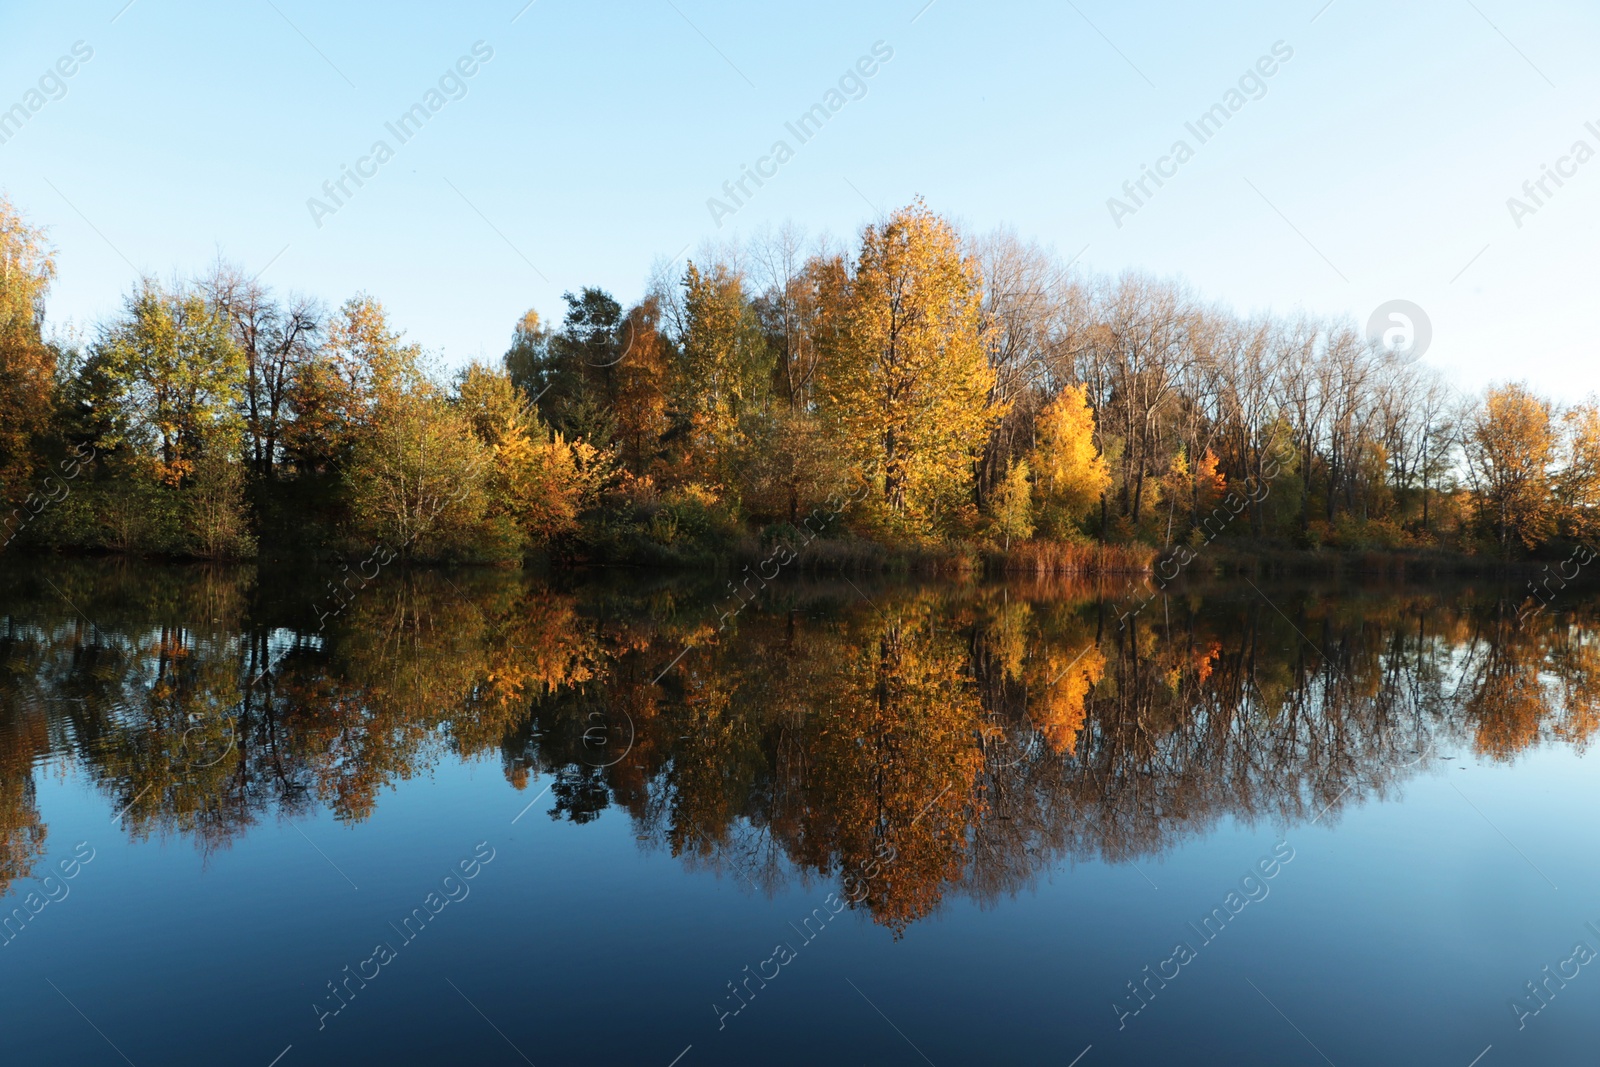 Photo of Picturesque view of lake and trees on autumn day